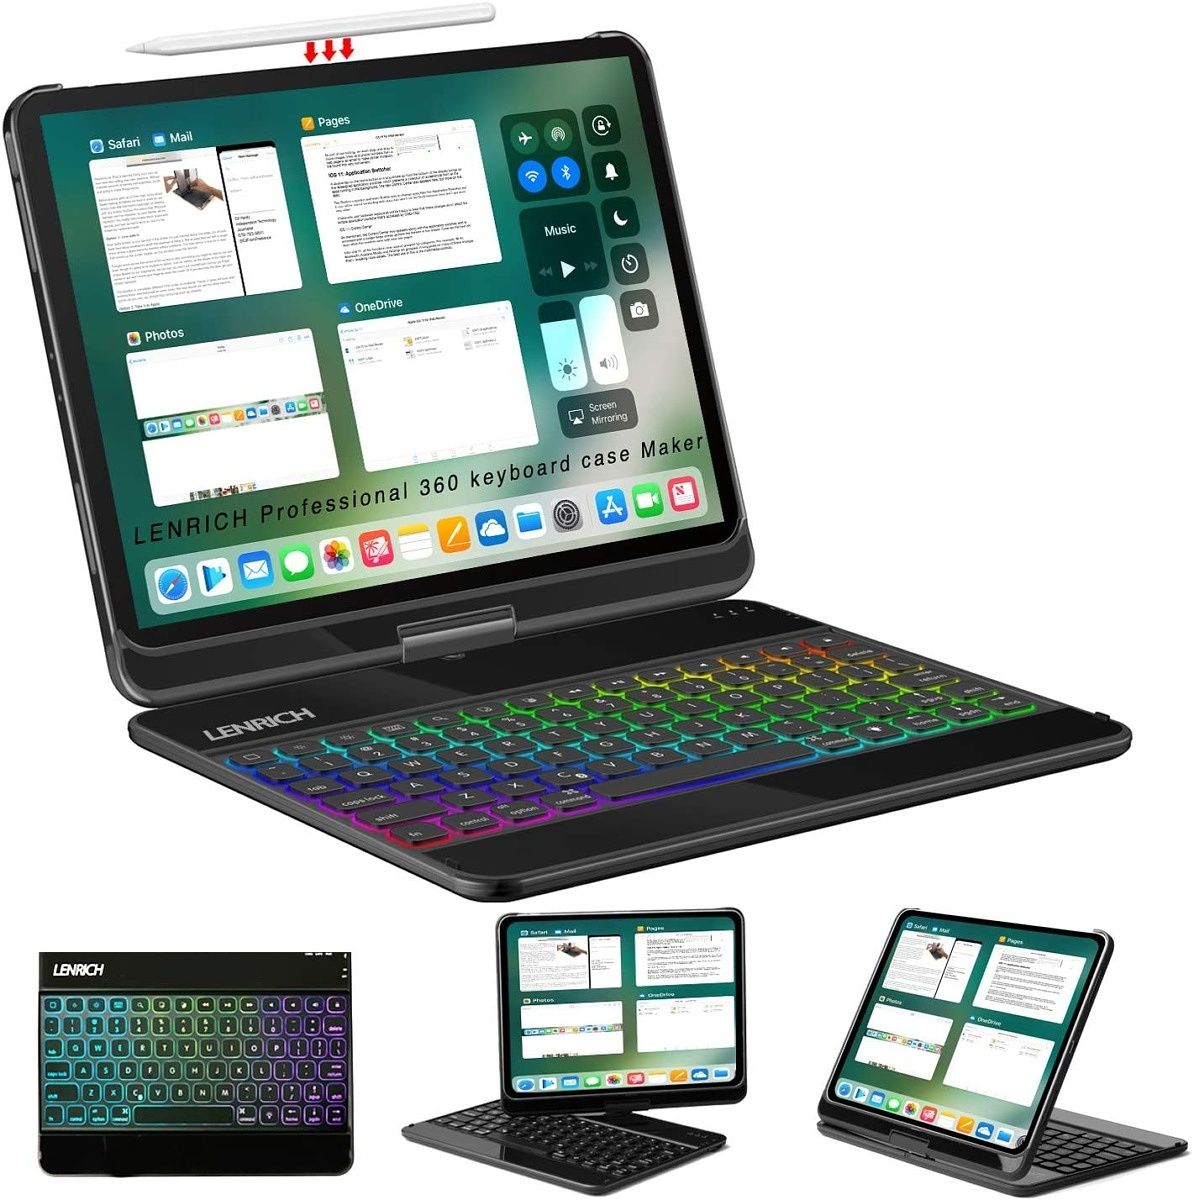 This iPad Pro keyboard case offers several unique features. In addition to a 360 degree swivel ability, you also get RGB backlit keys. Put all of this together with an affordable price tag and you have a winner.